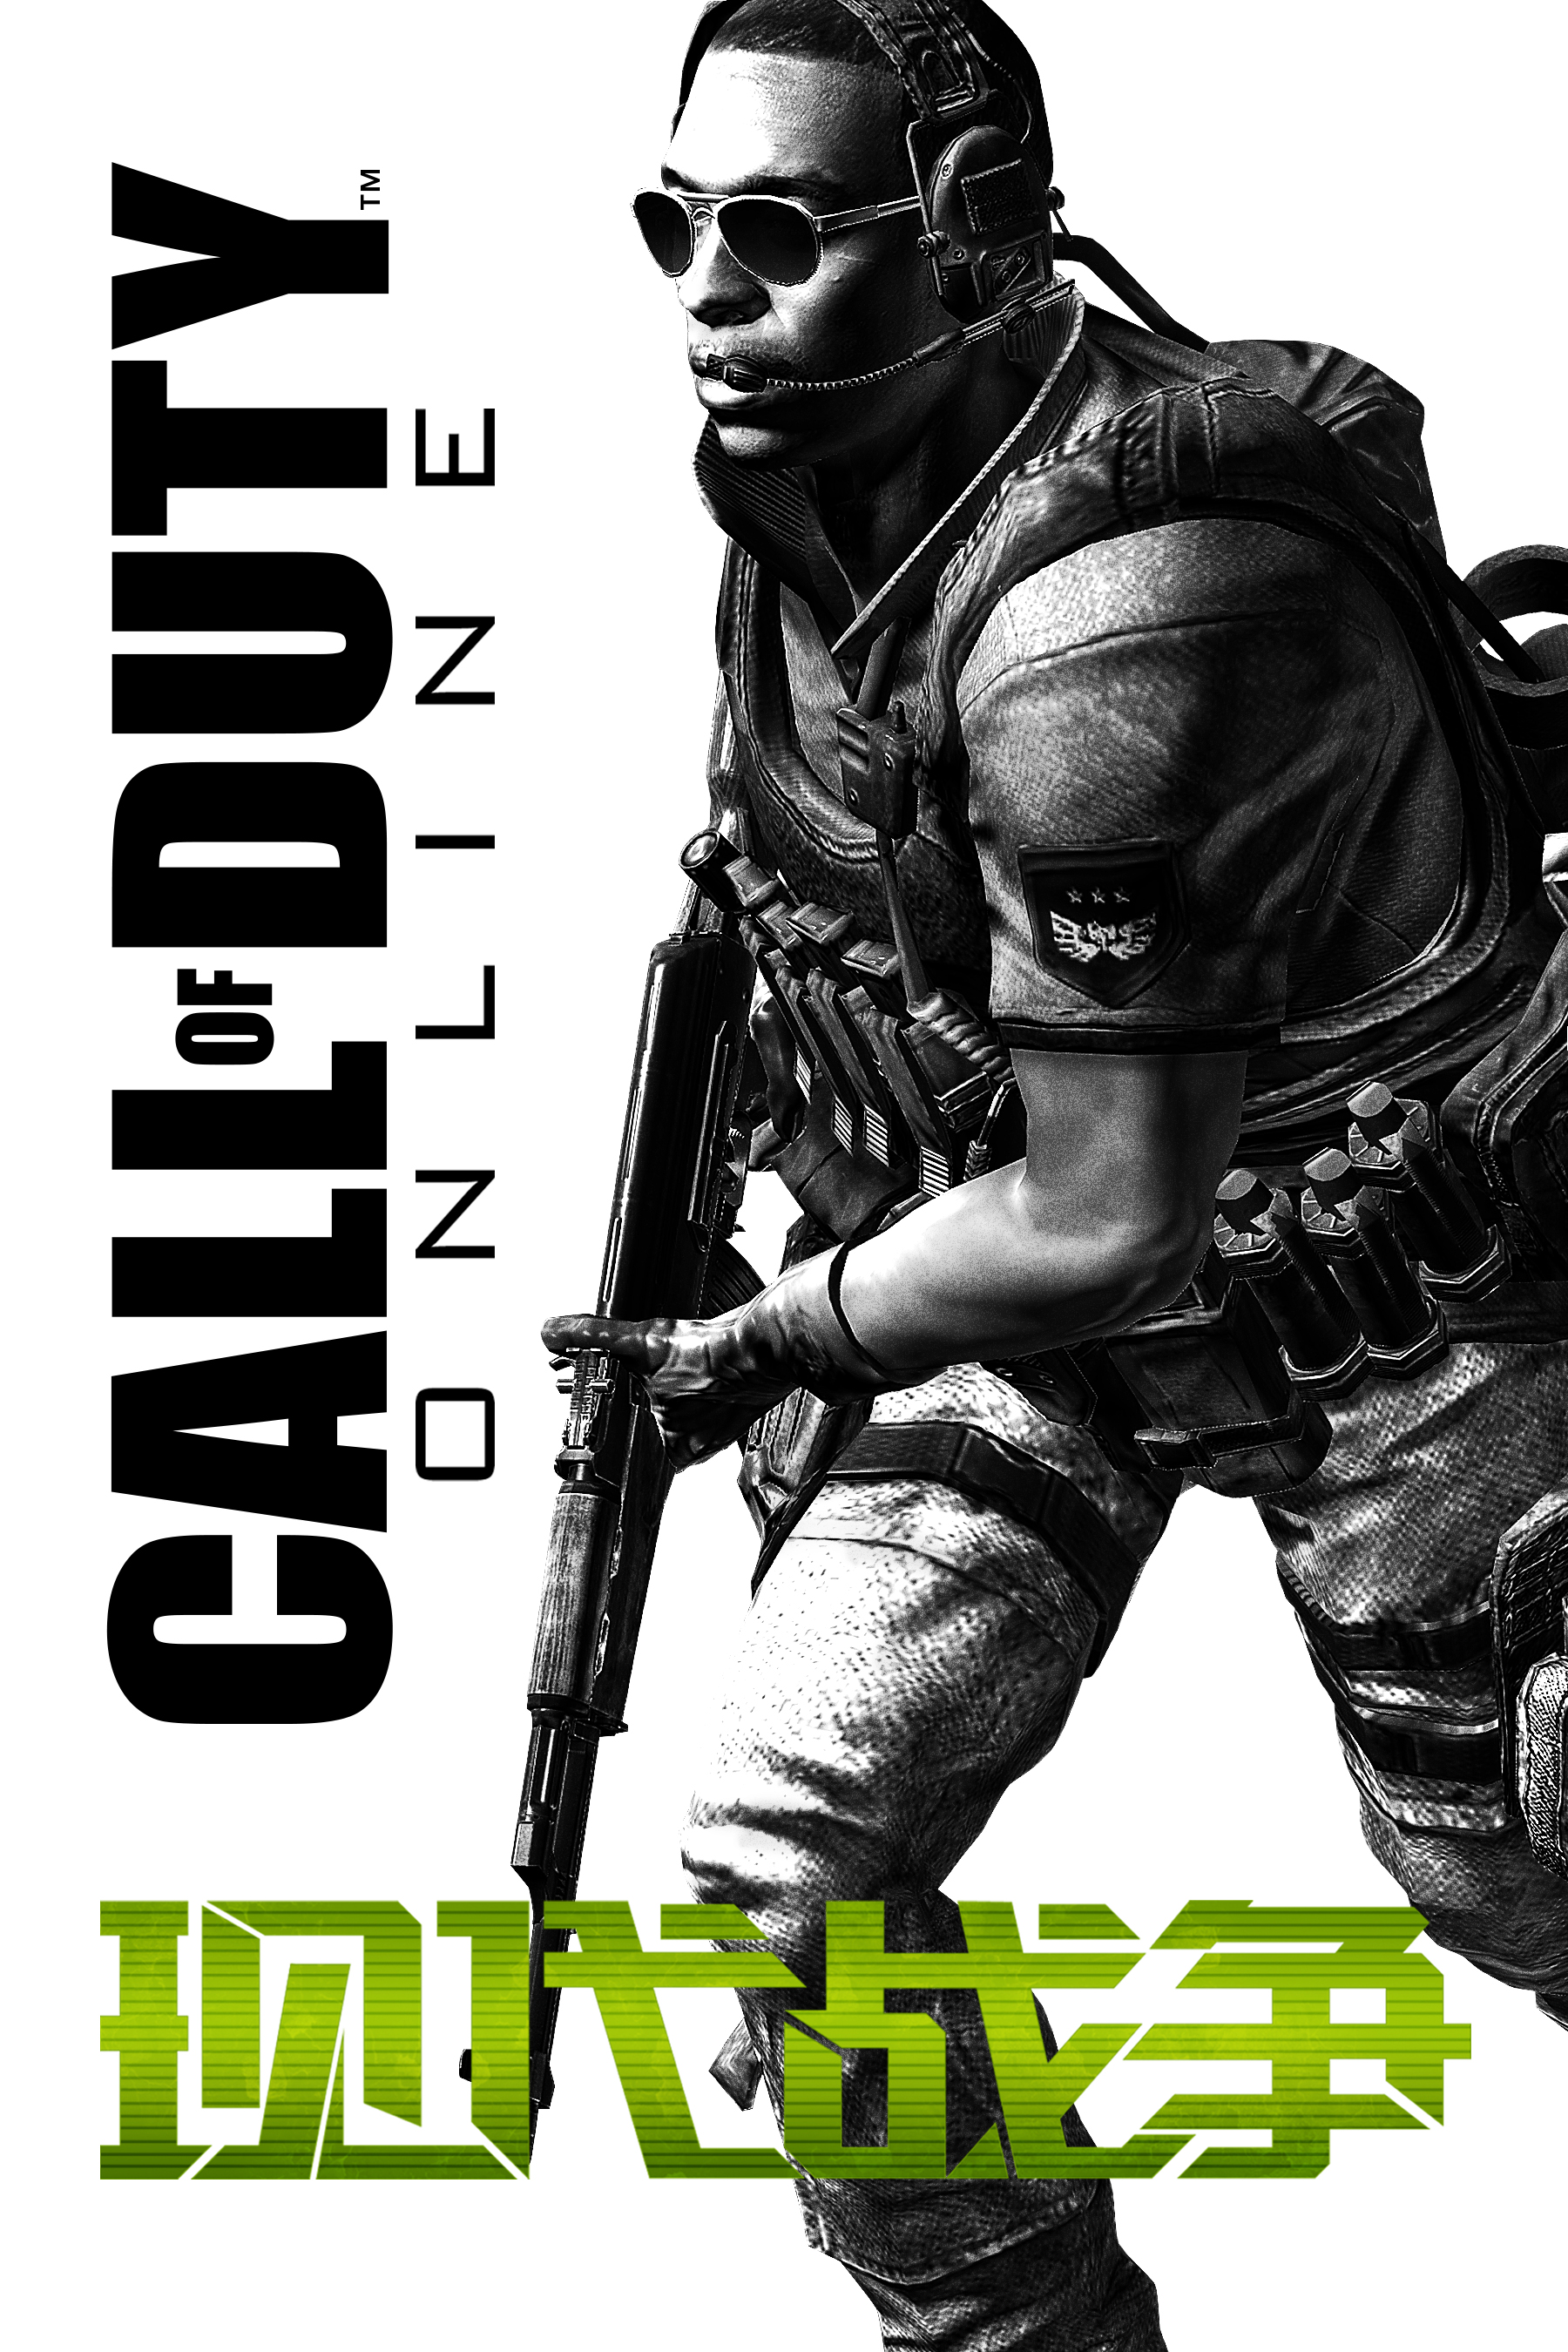 Call of Duty Online Character Image